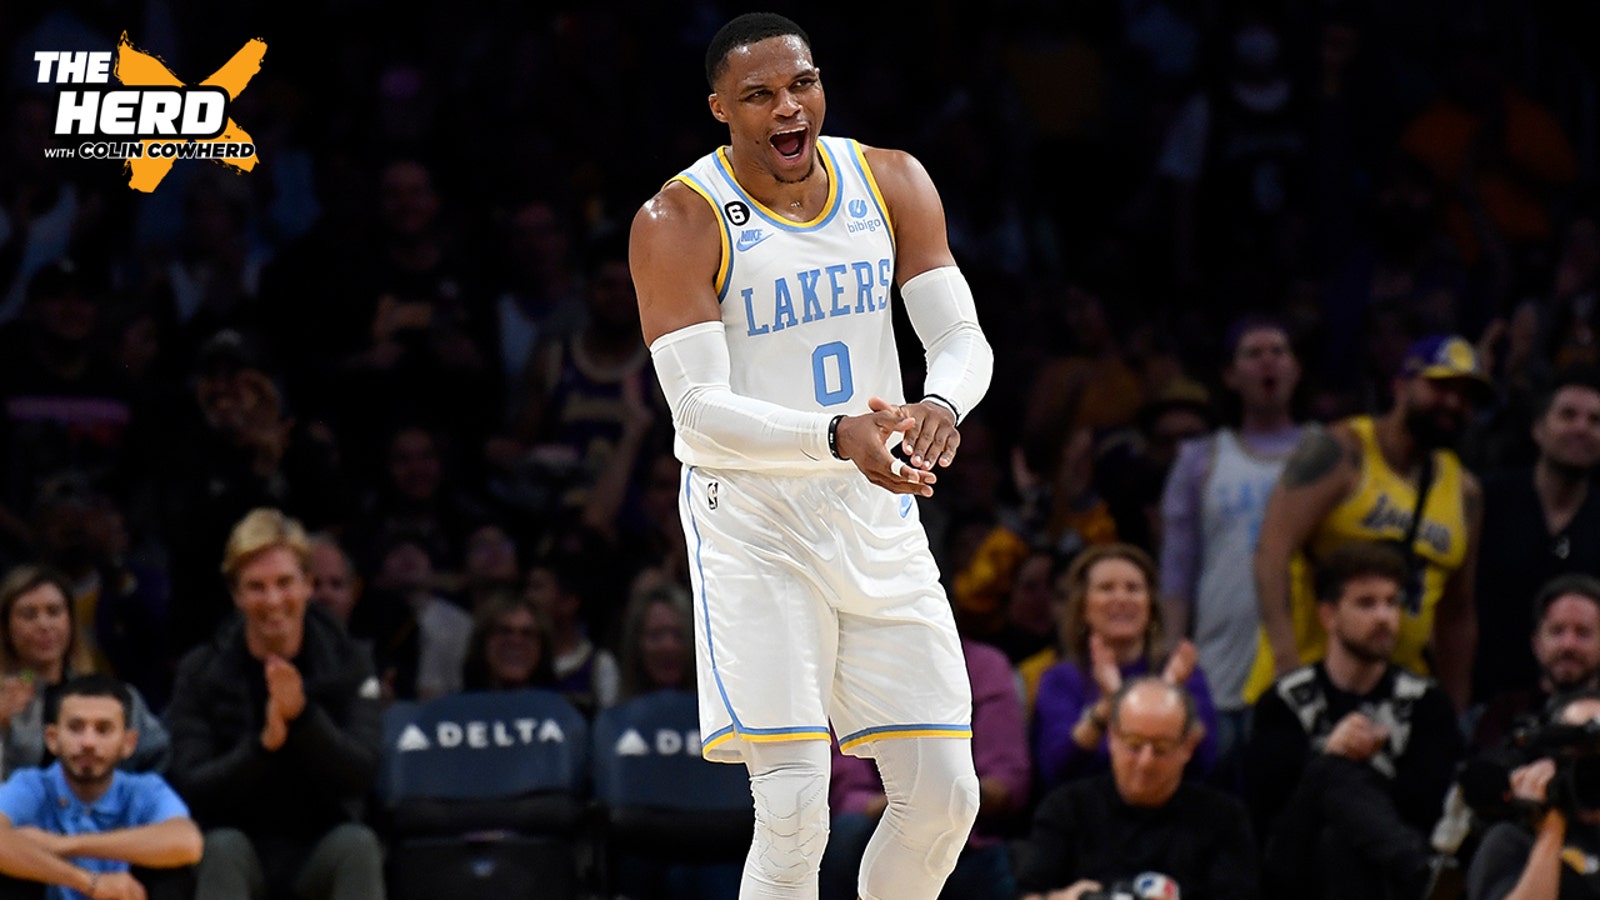 The Lakers win their second straight with Russell Westbrook off the bench